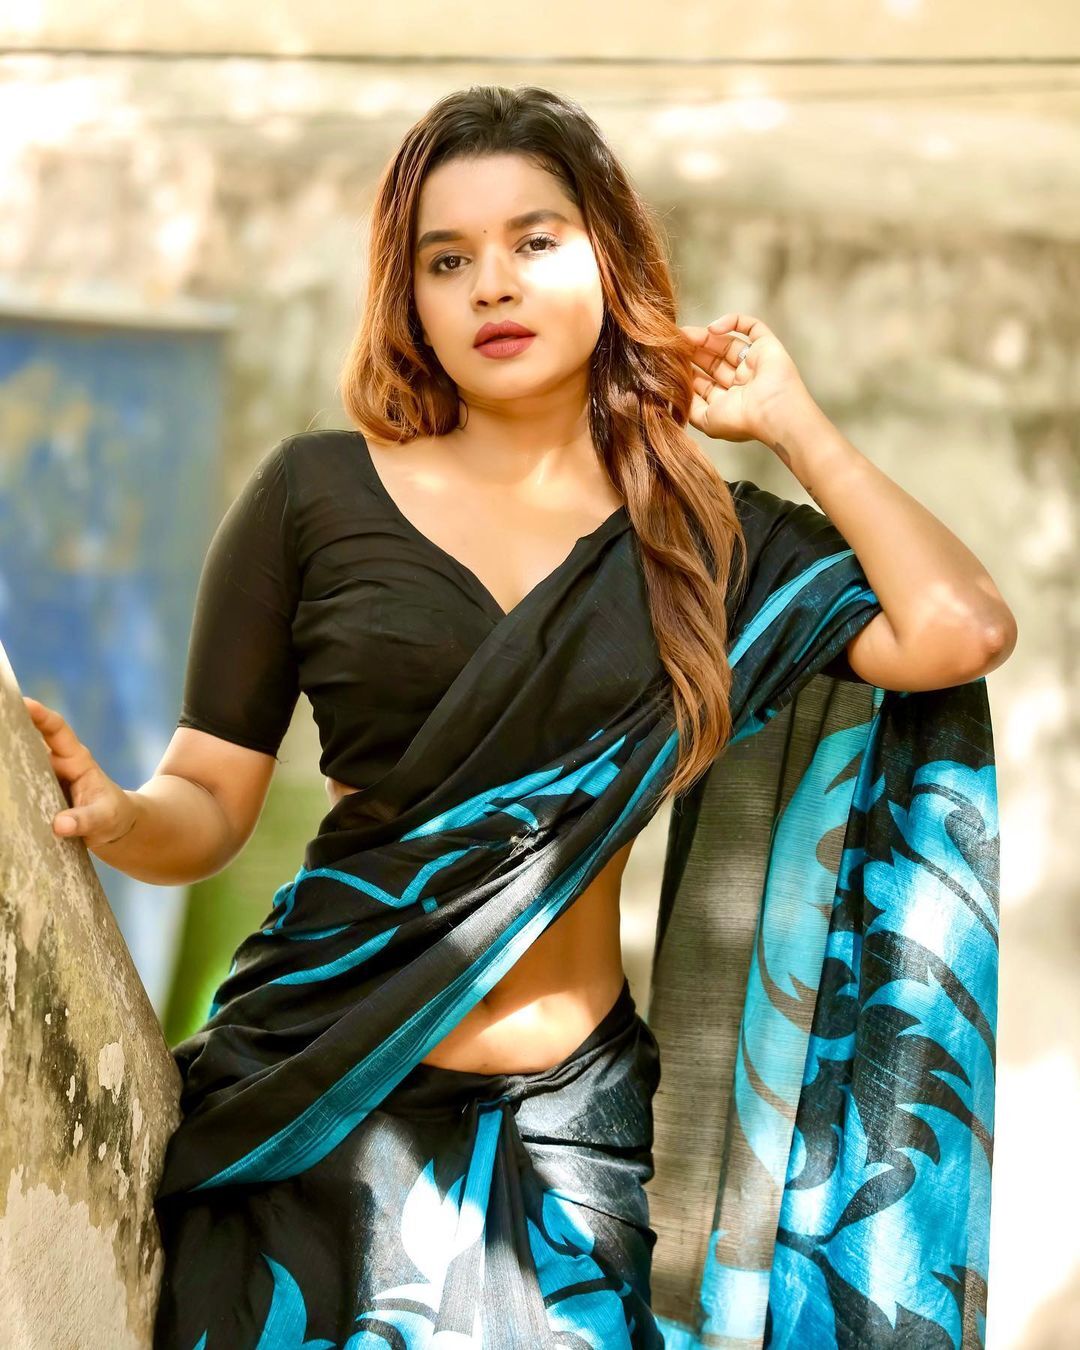 What are you posing in a saree? Veena Jessie in stunning beauty!